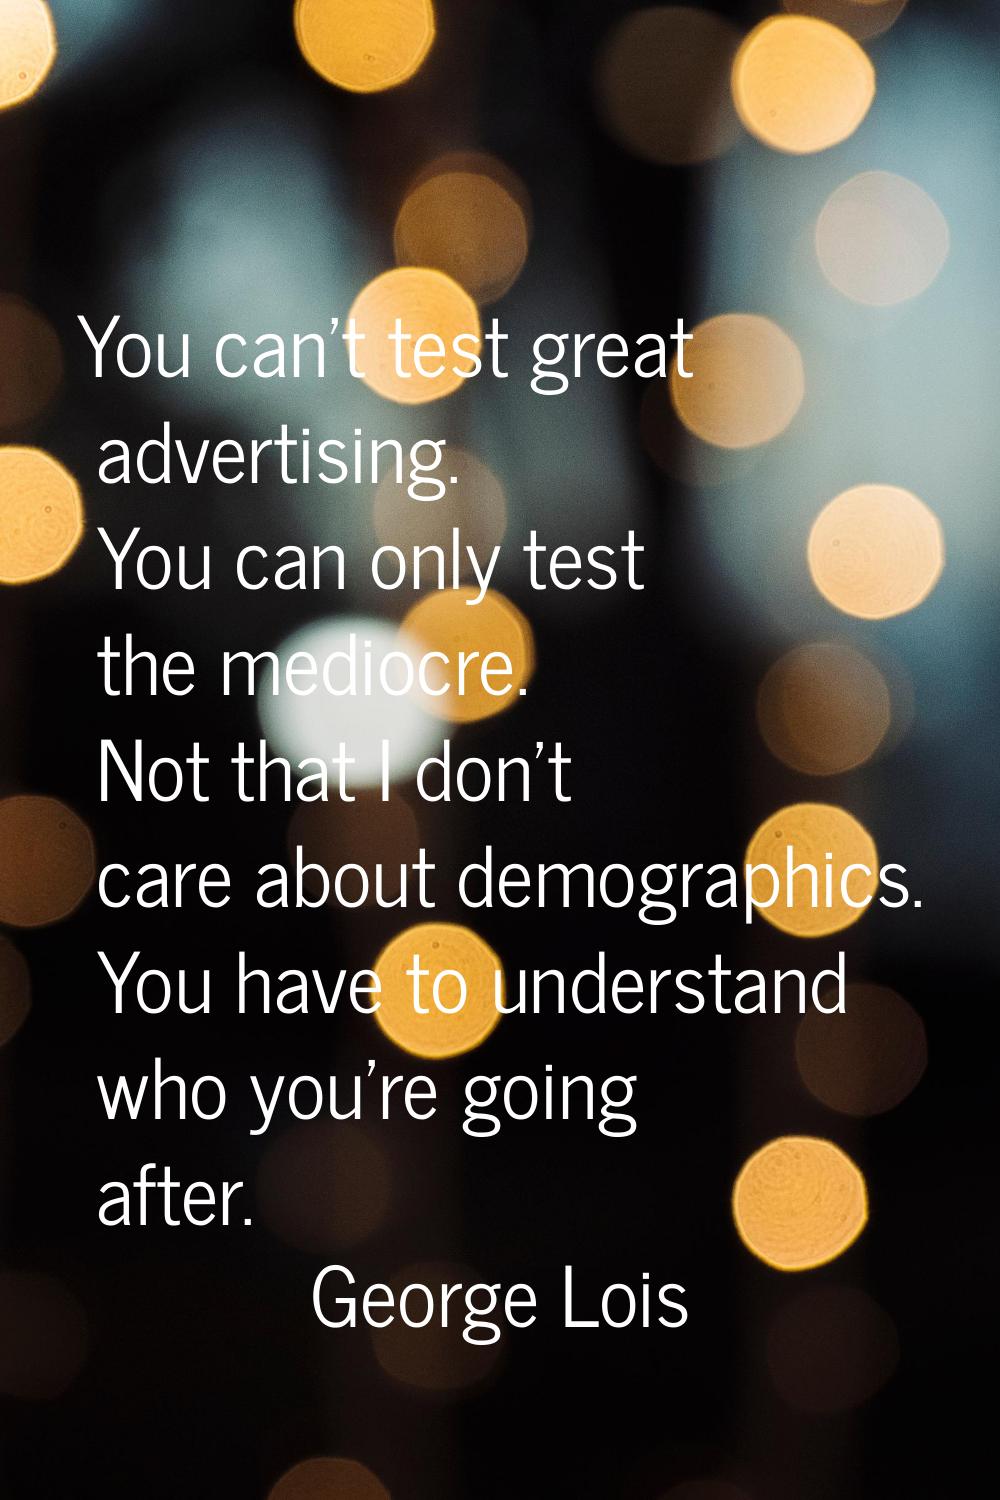 You can't test great advertising. You can only test the mediocre. Not that I don't care about demog